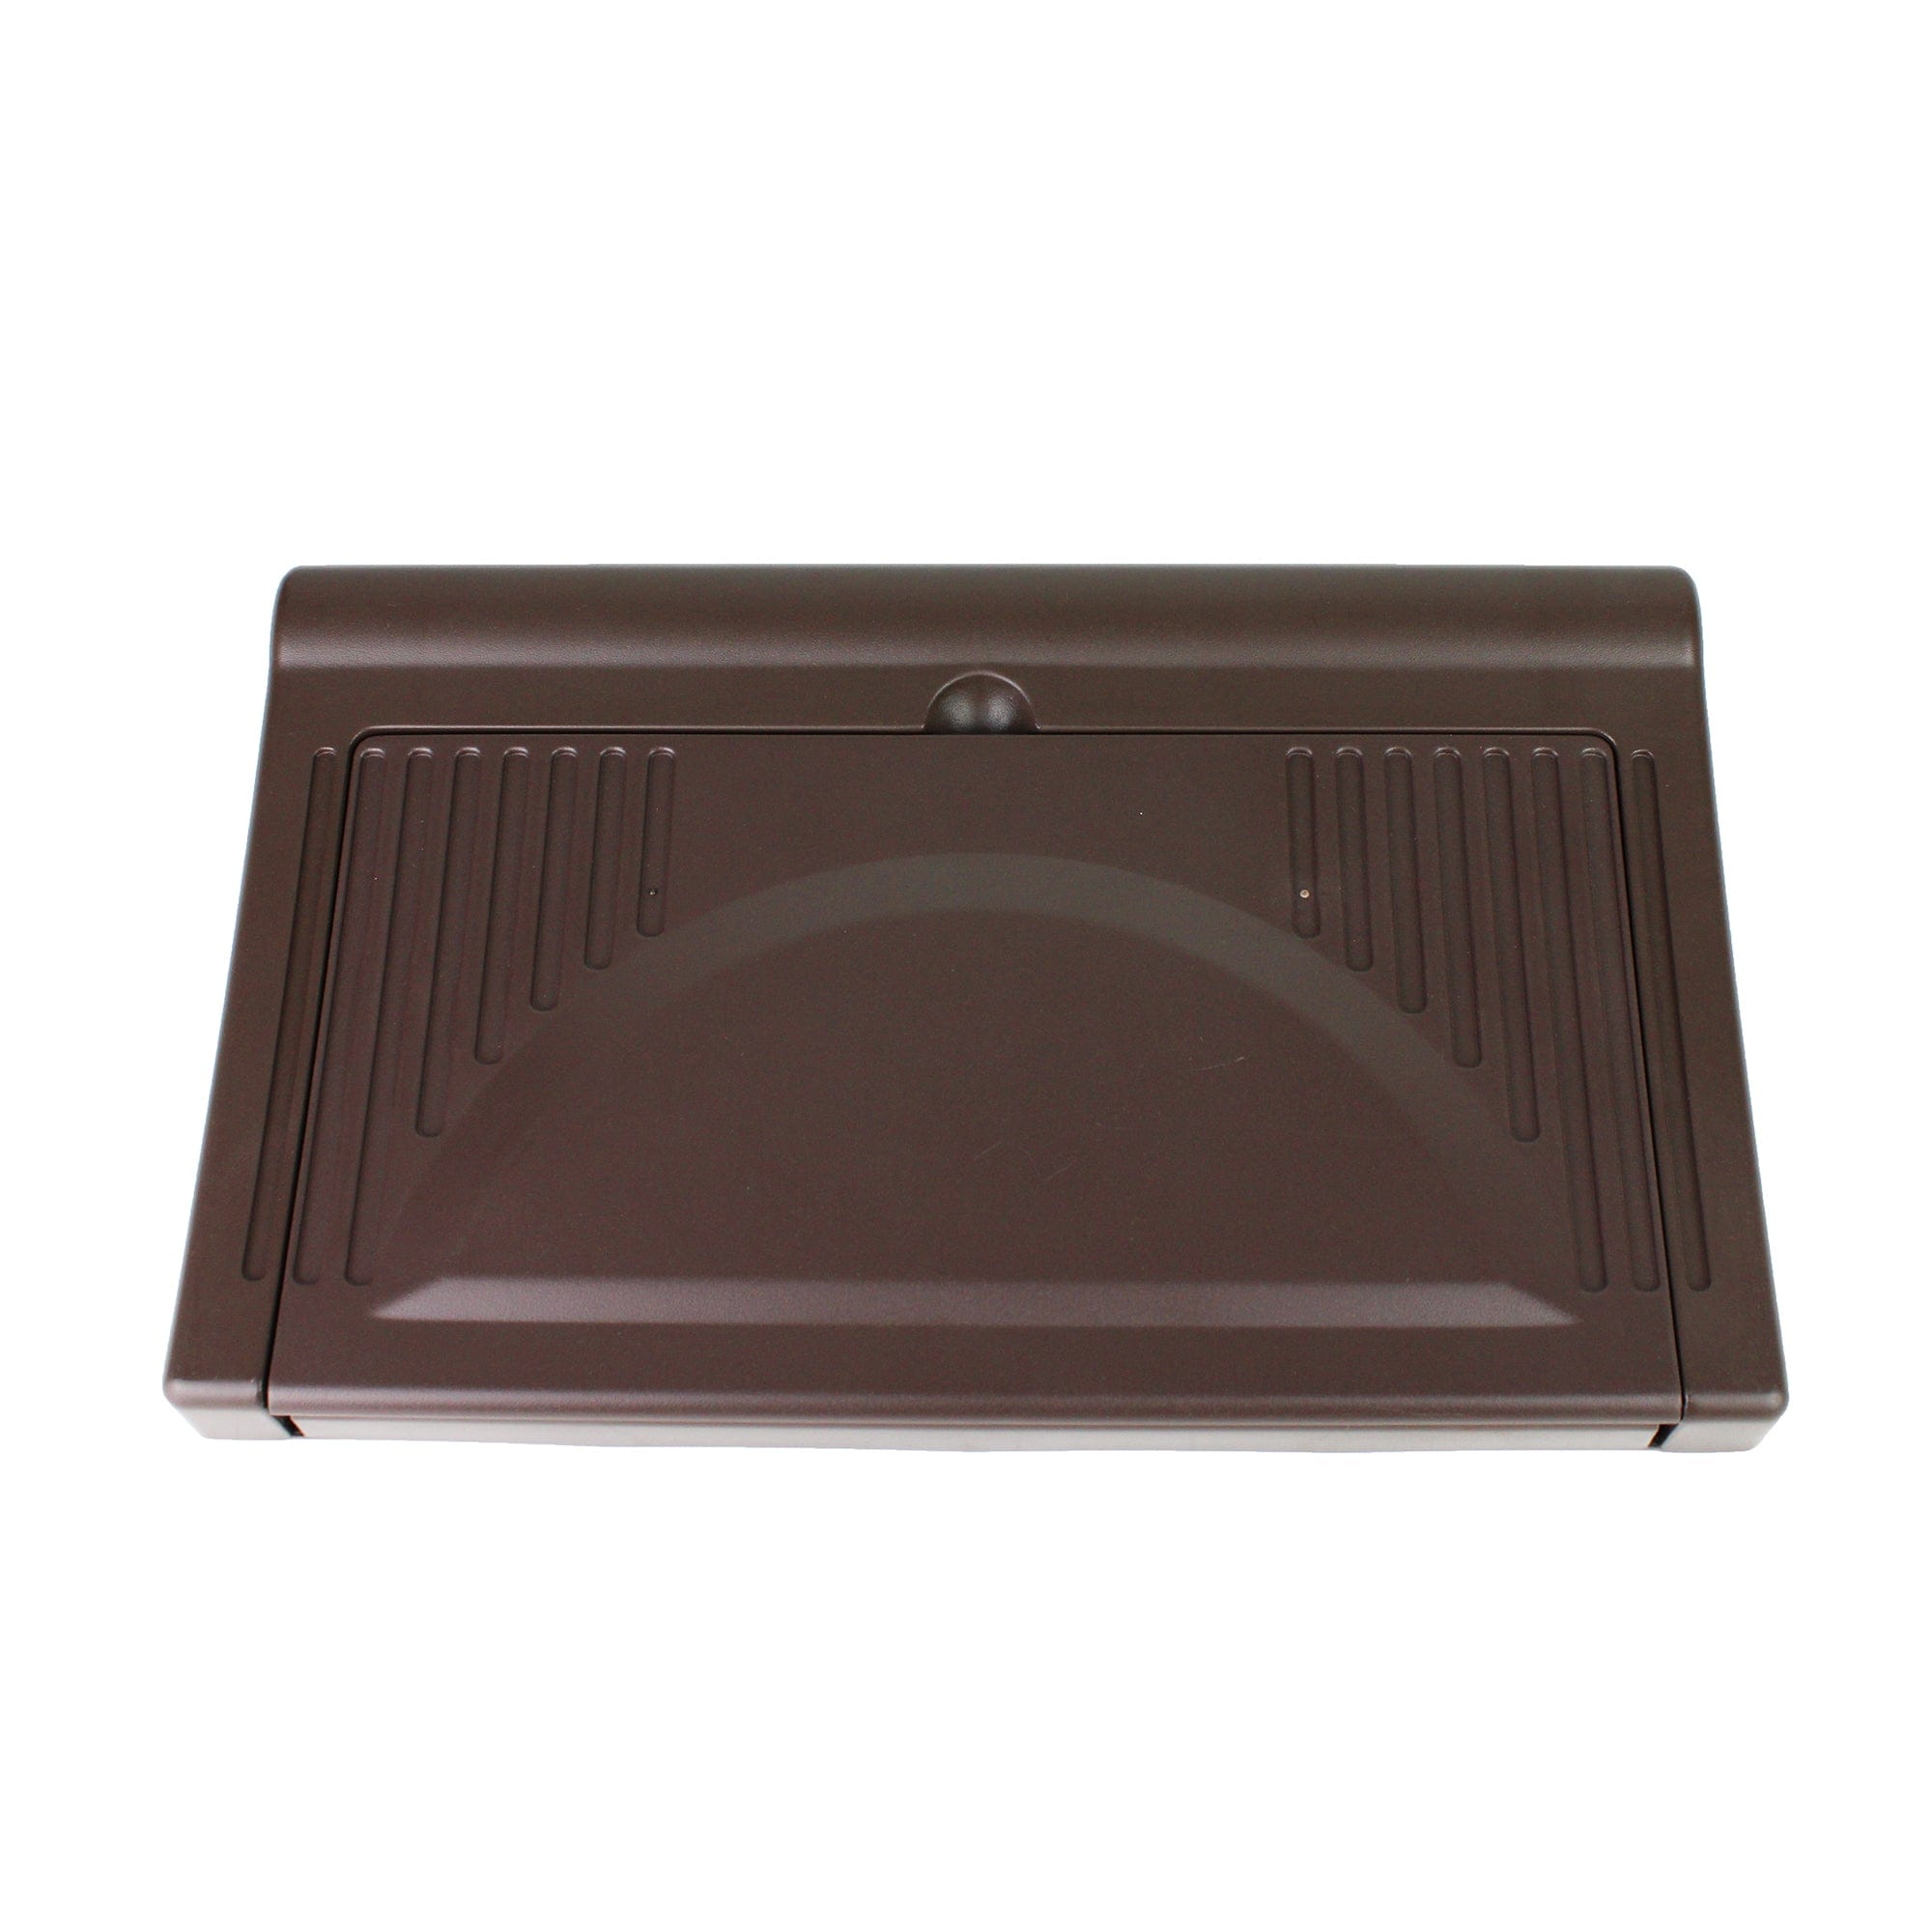 WFCO WF-8712-PDA Brown Plastic Door Assembly for WF-8712-P, 7-1/4"x11-3/4"